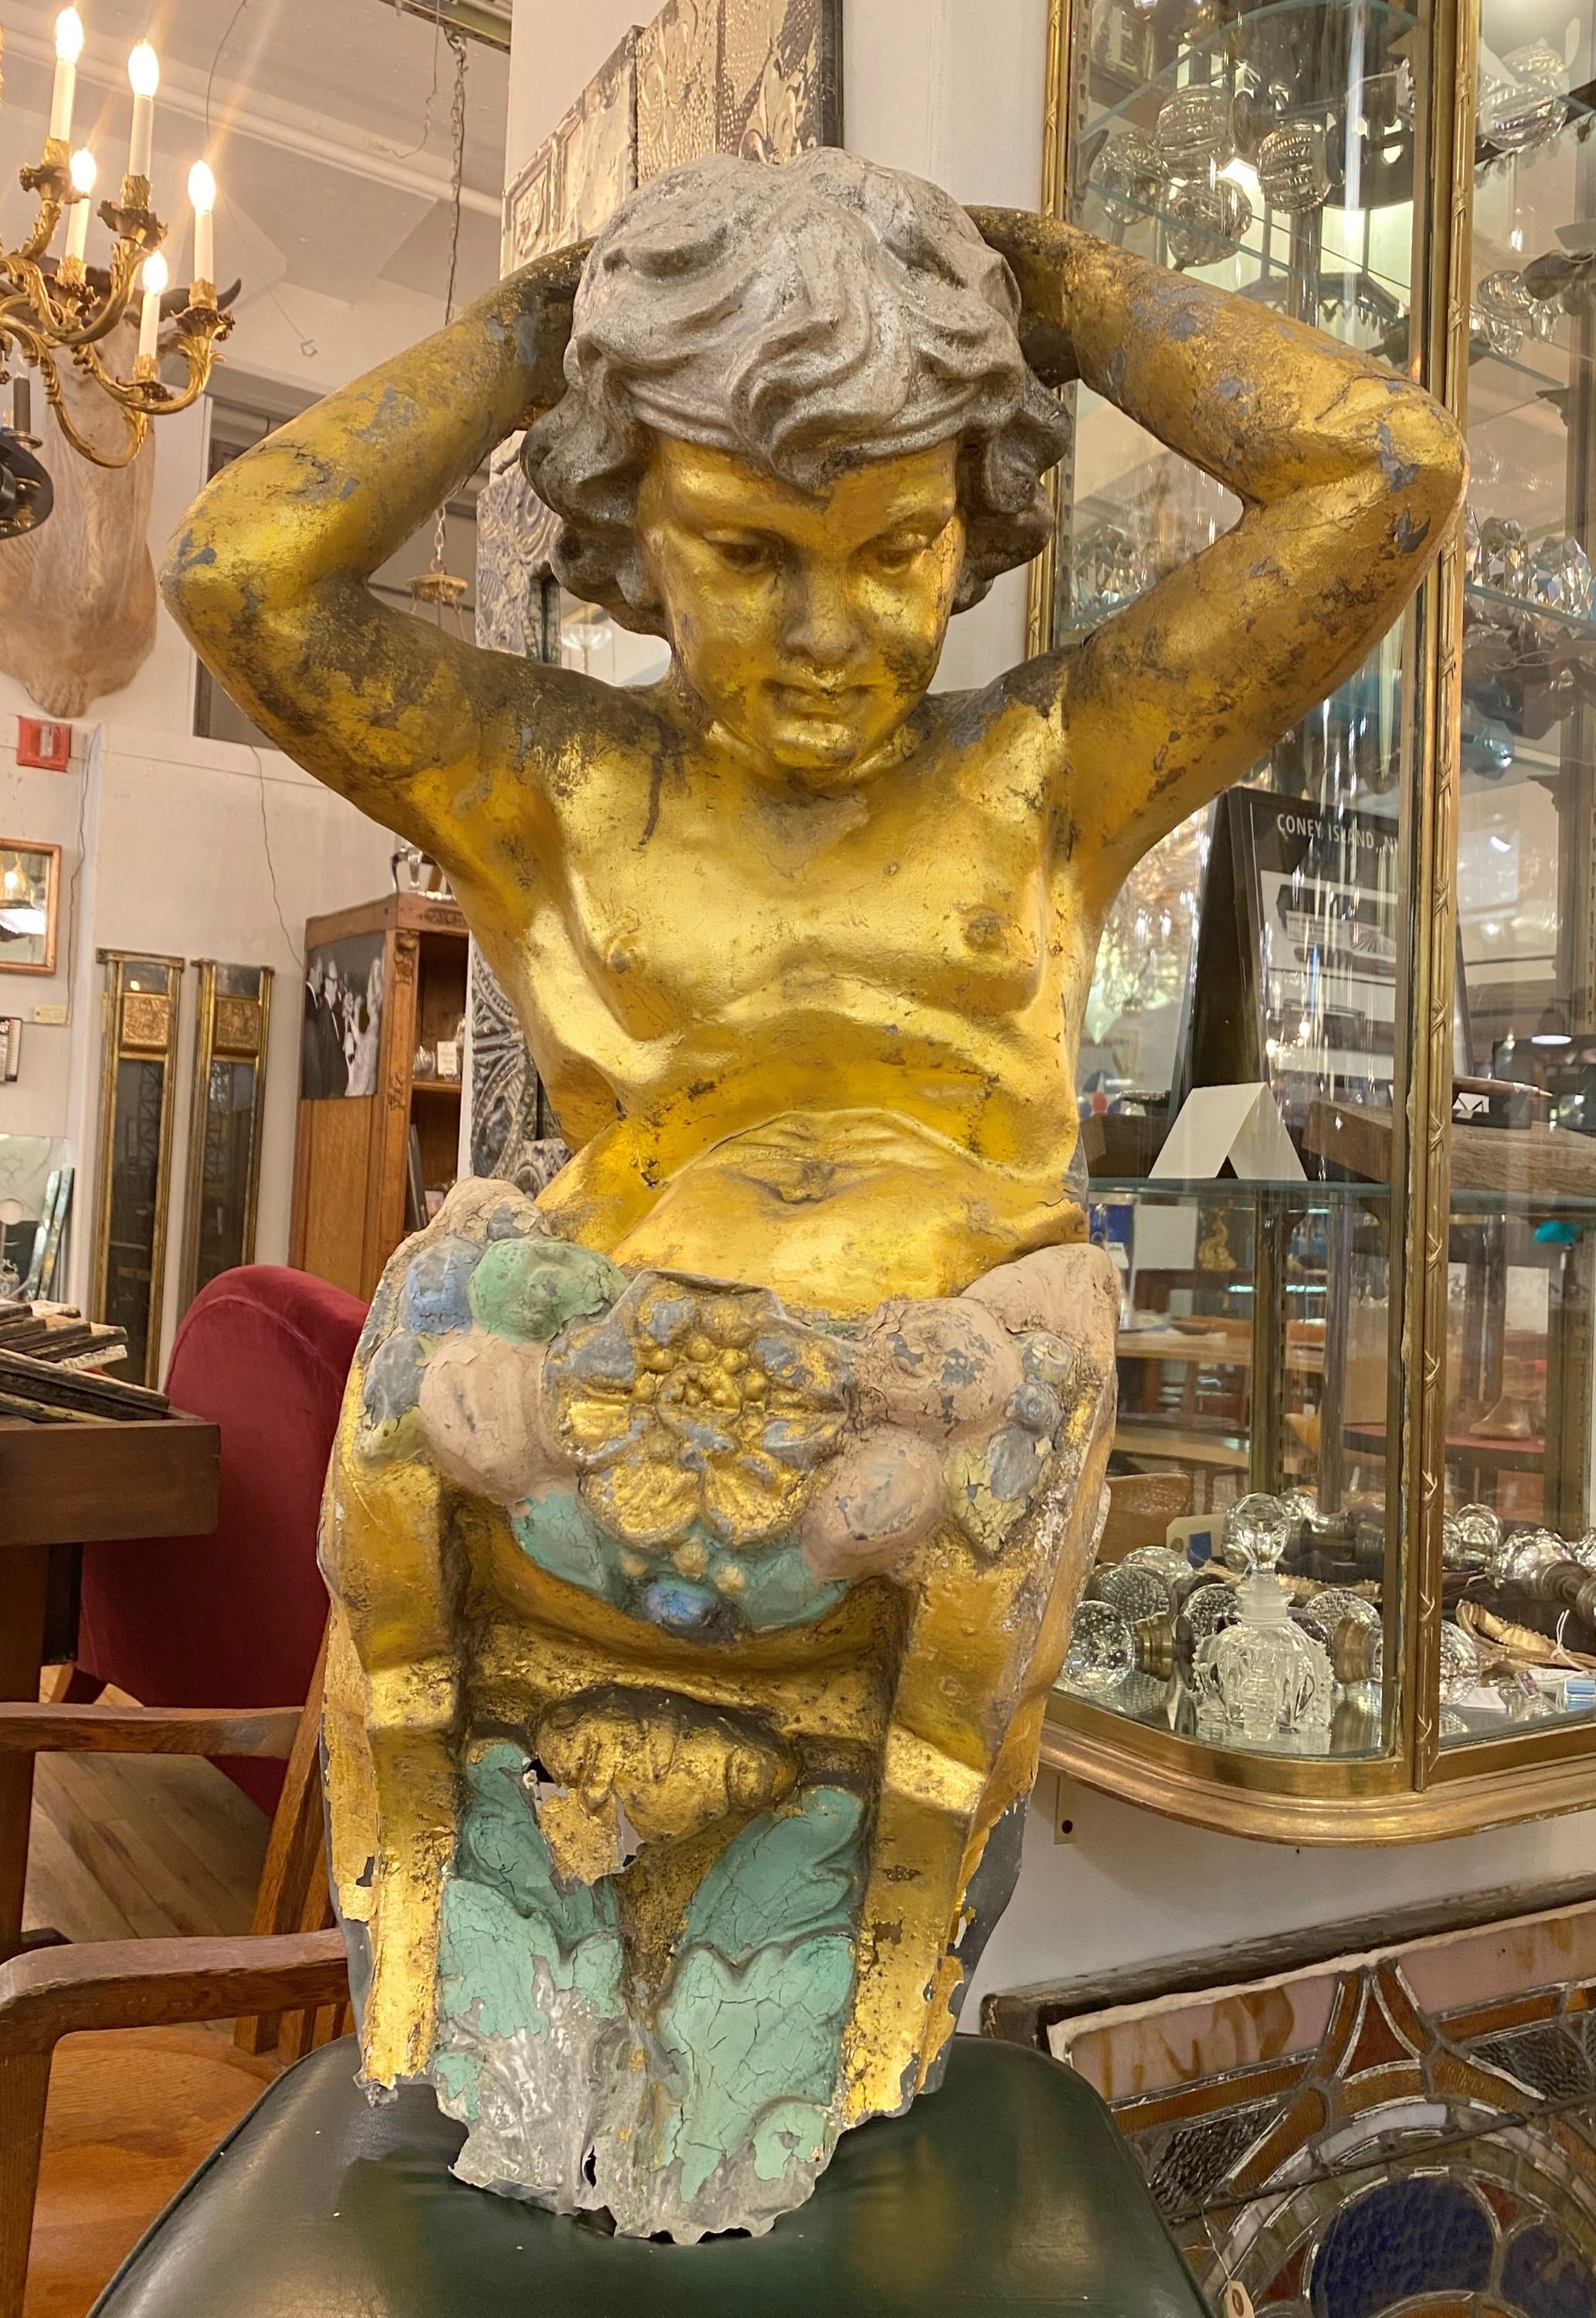 Late 19th century zinc 3 dimensional Italian putti statue of a baby angel. This piece adorned the 2nd floor building façade above the main entrance. From the Grand Prospect Hall on the Prospect Expressway in Brooklyn. Original gilt and colored